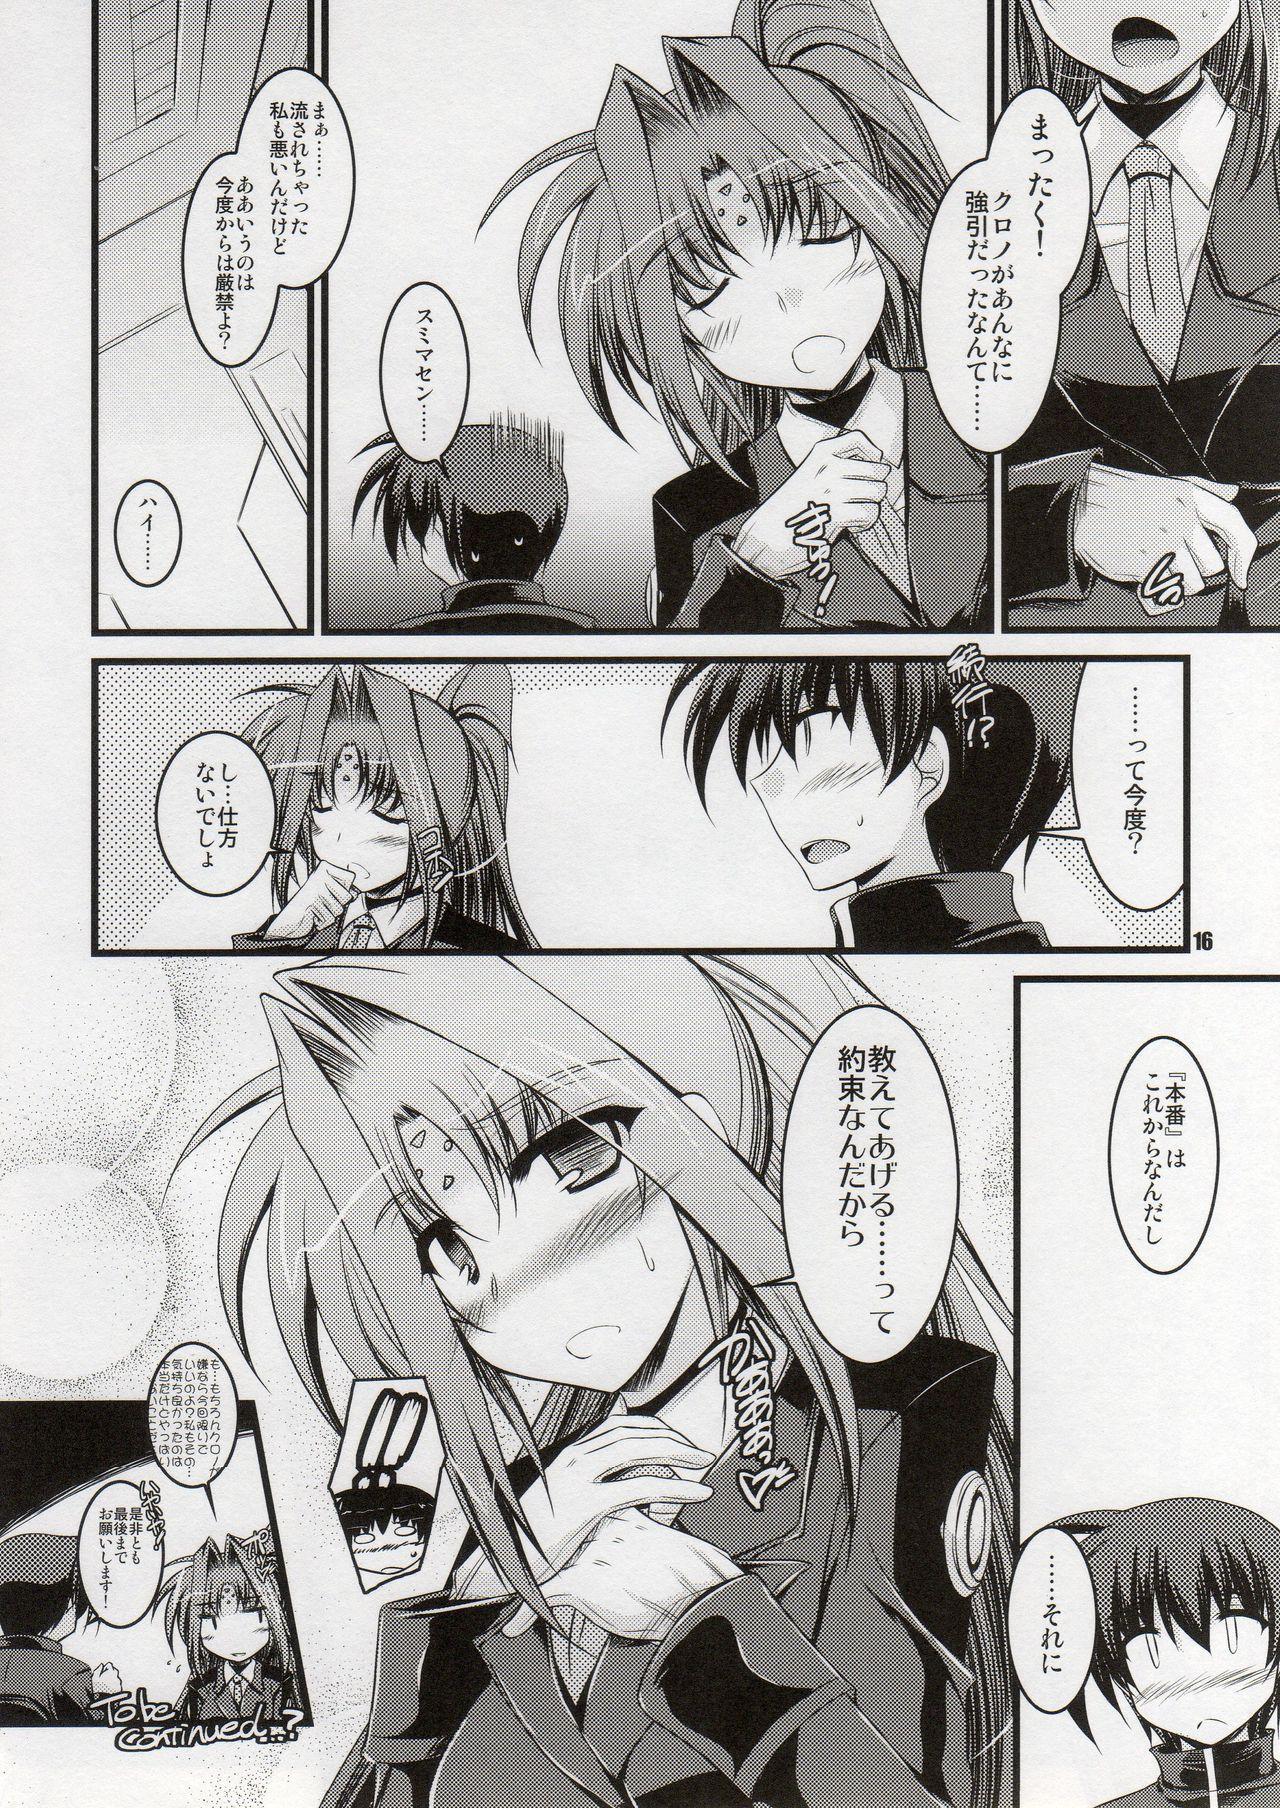 ANOTHER FRONTIER EXTRA APPEND 14